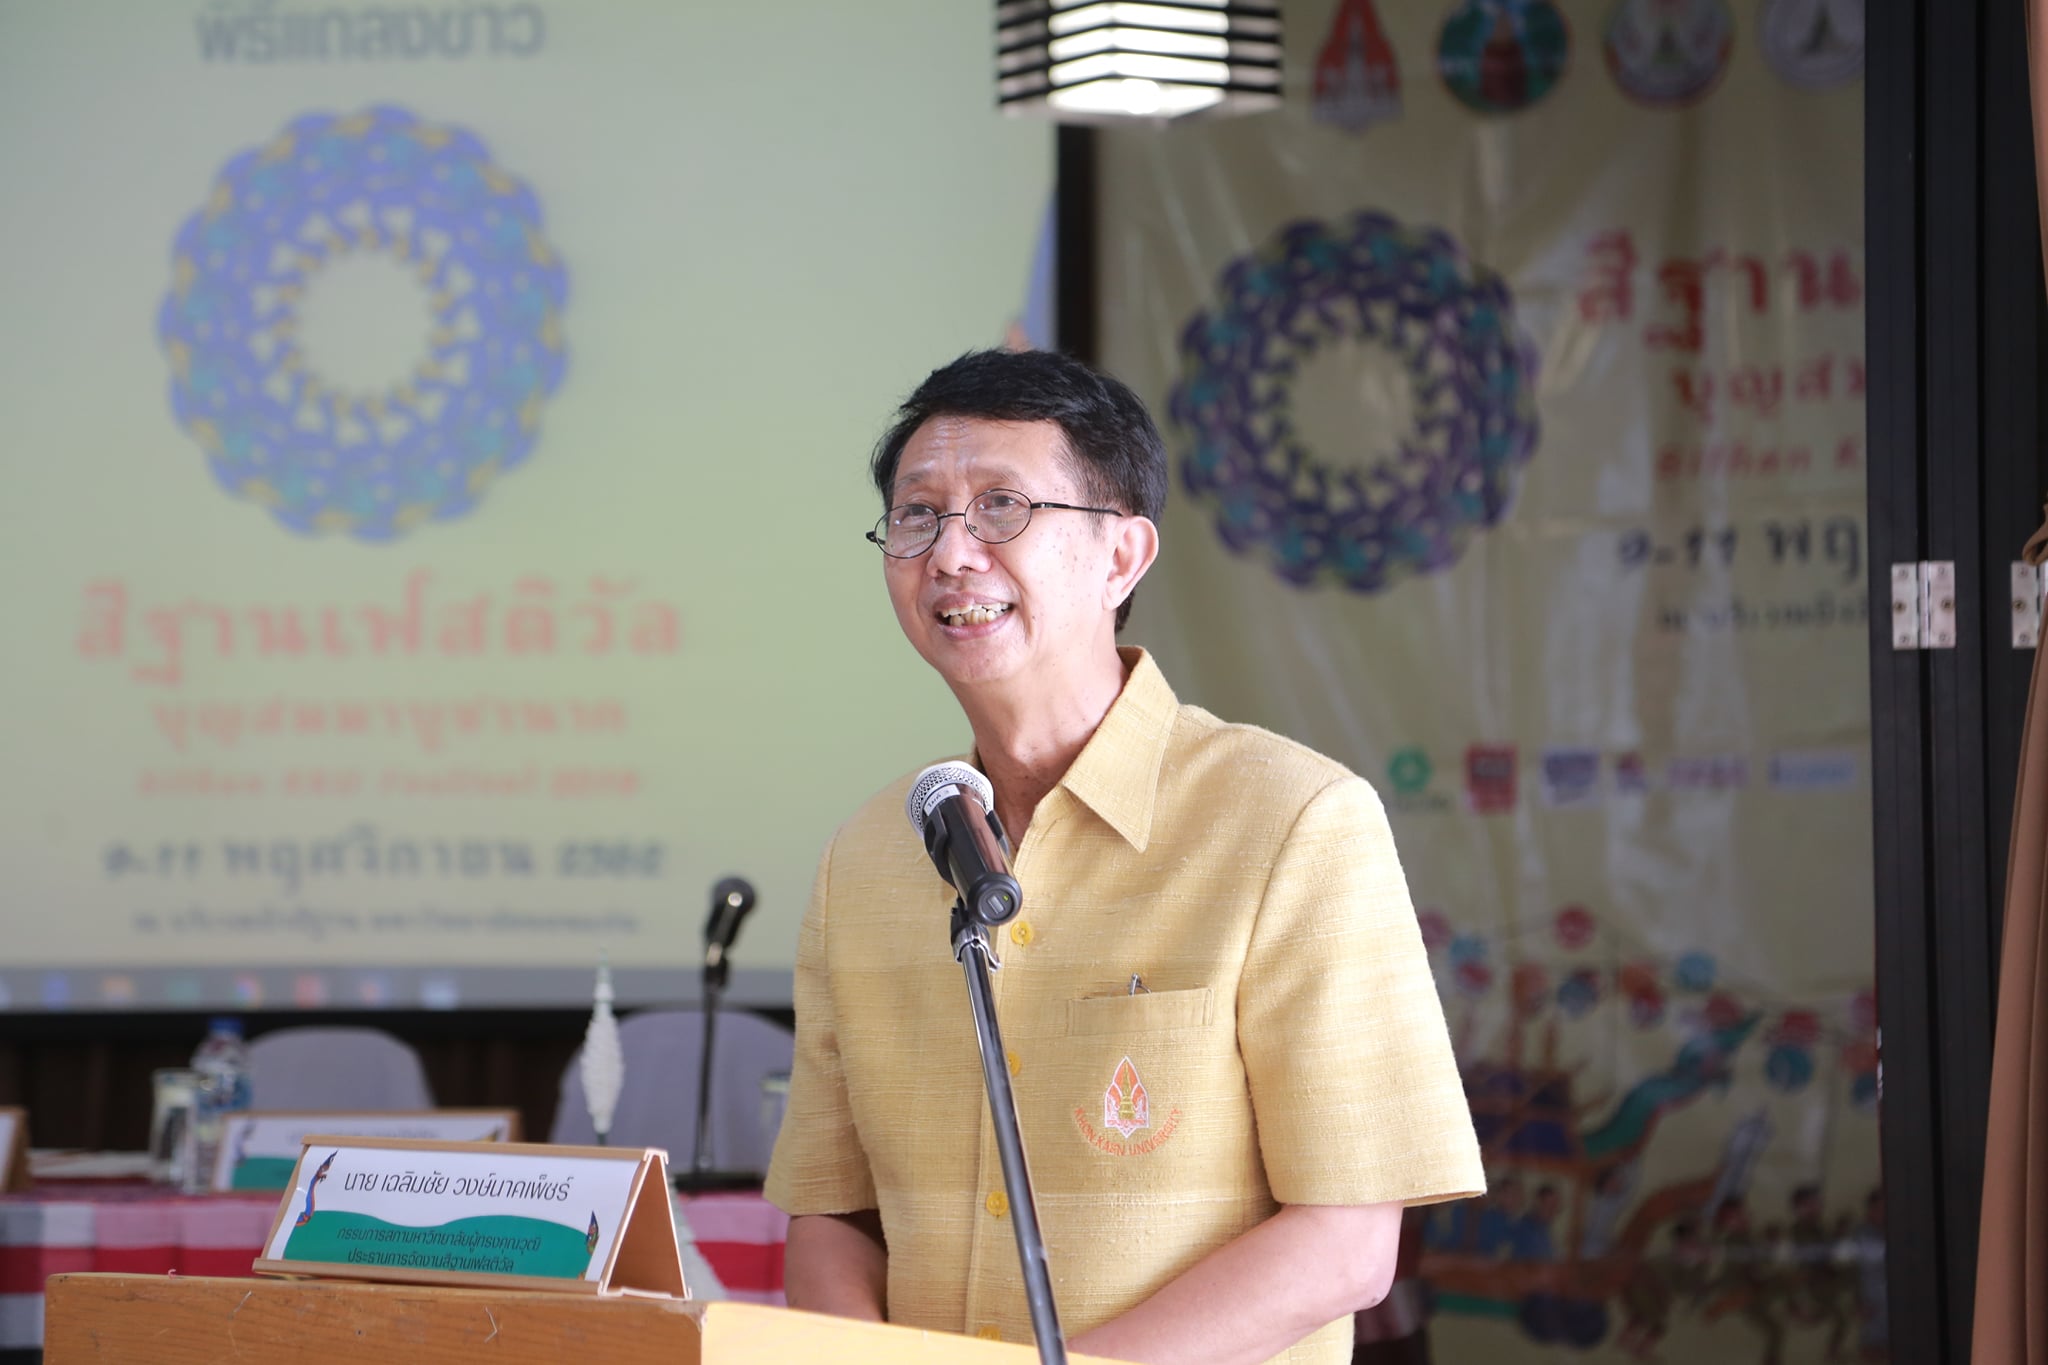 Mr. Chalermchai Wongnakpet, a qualified member of KKU Council and the Chairperson of Sithan Festival